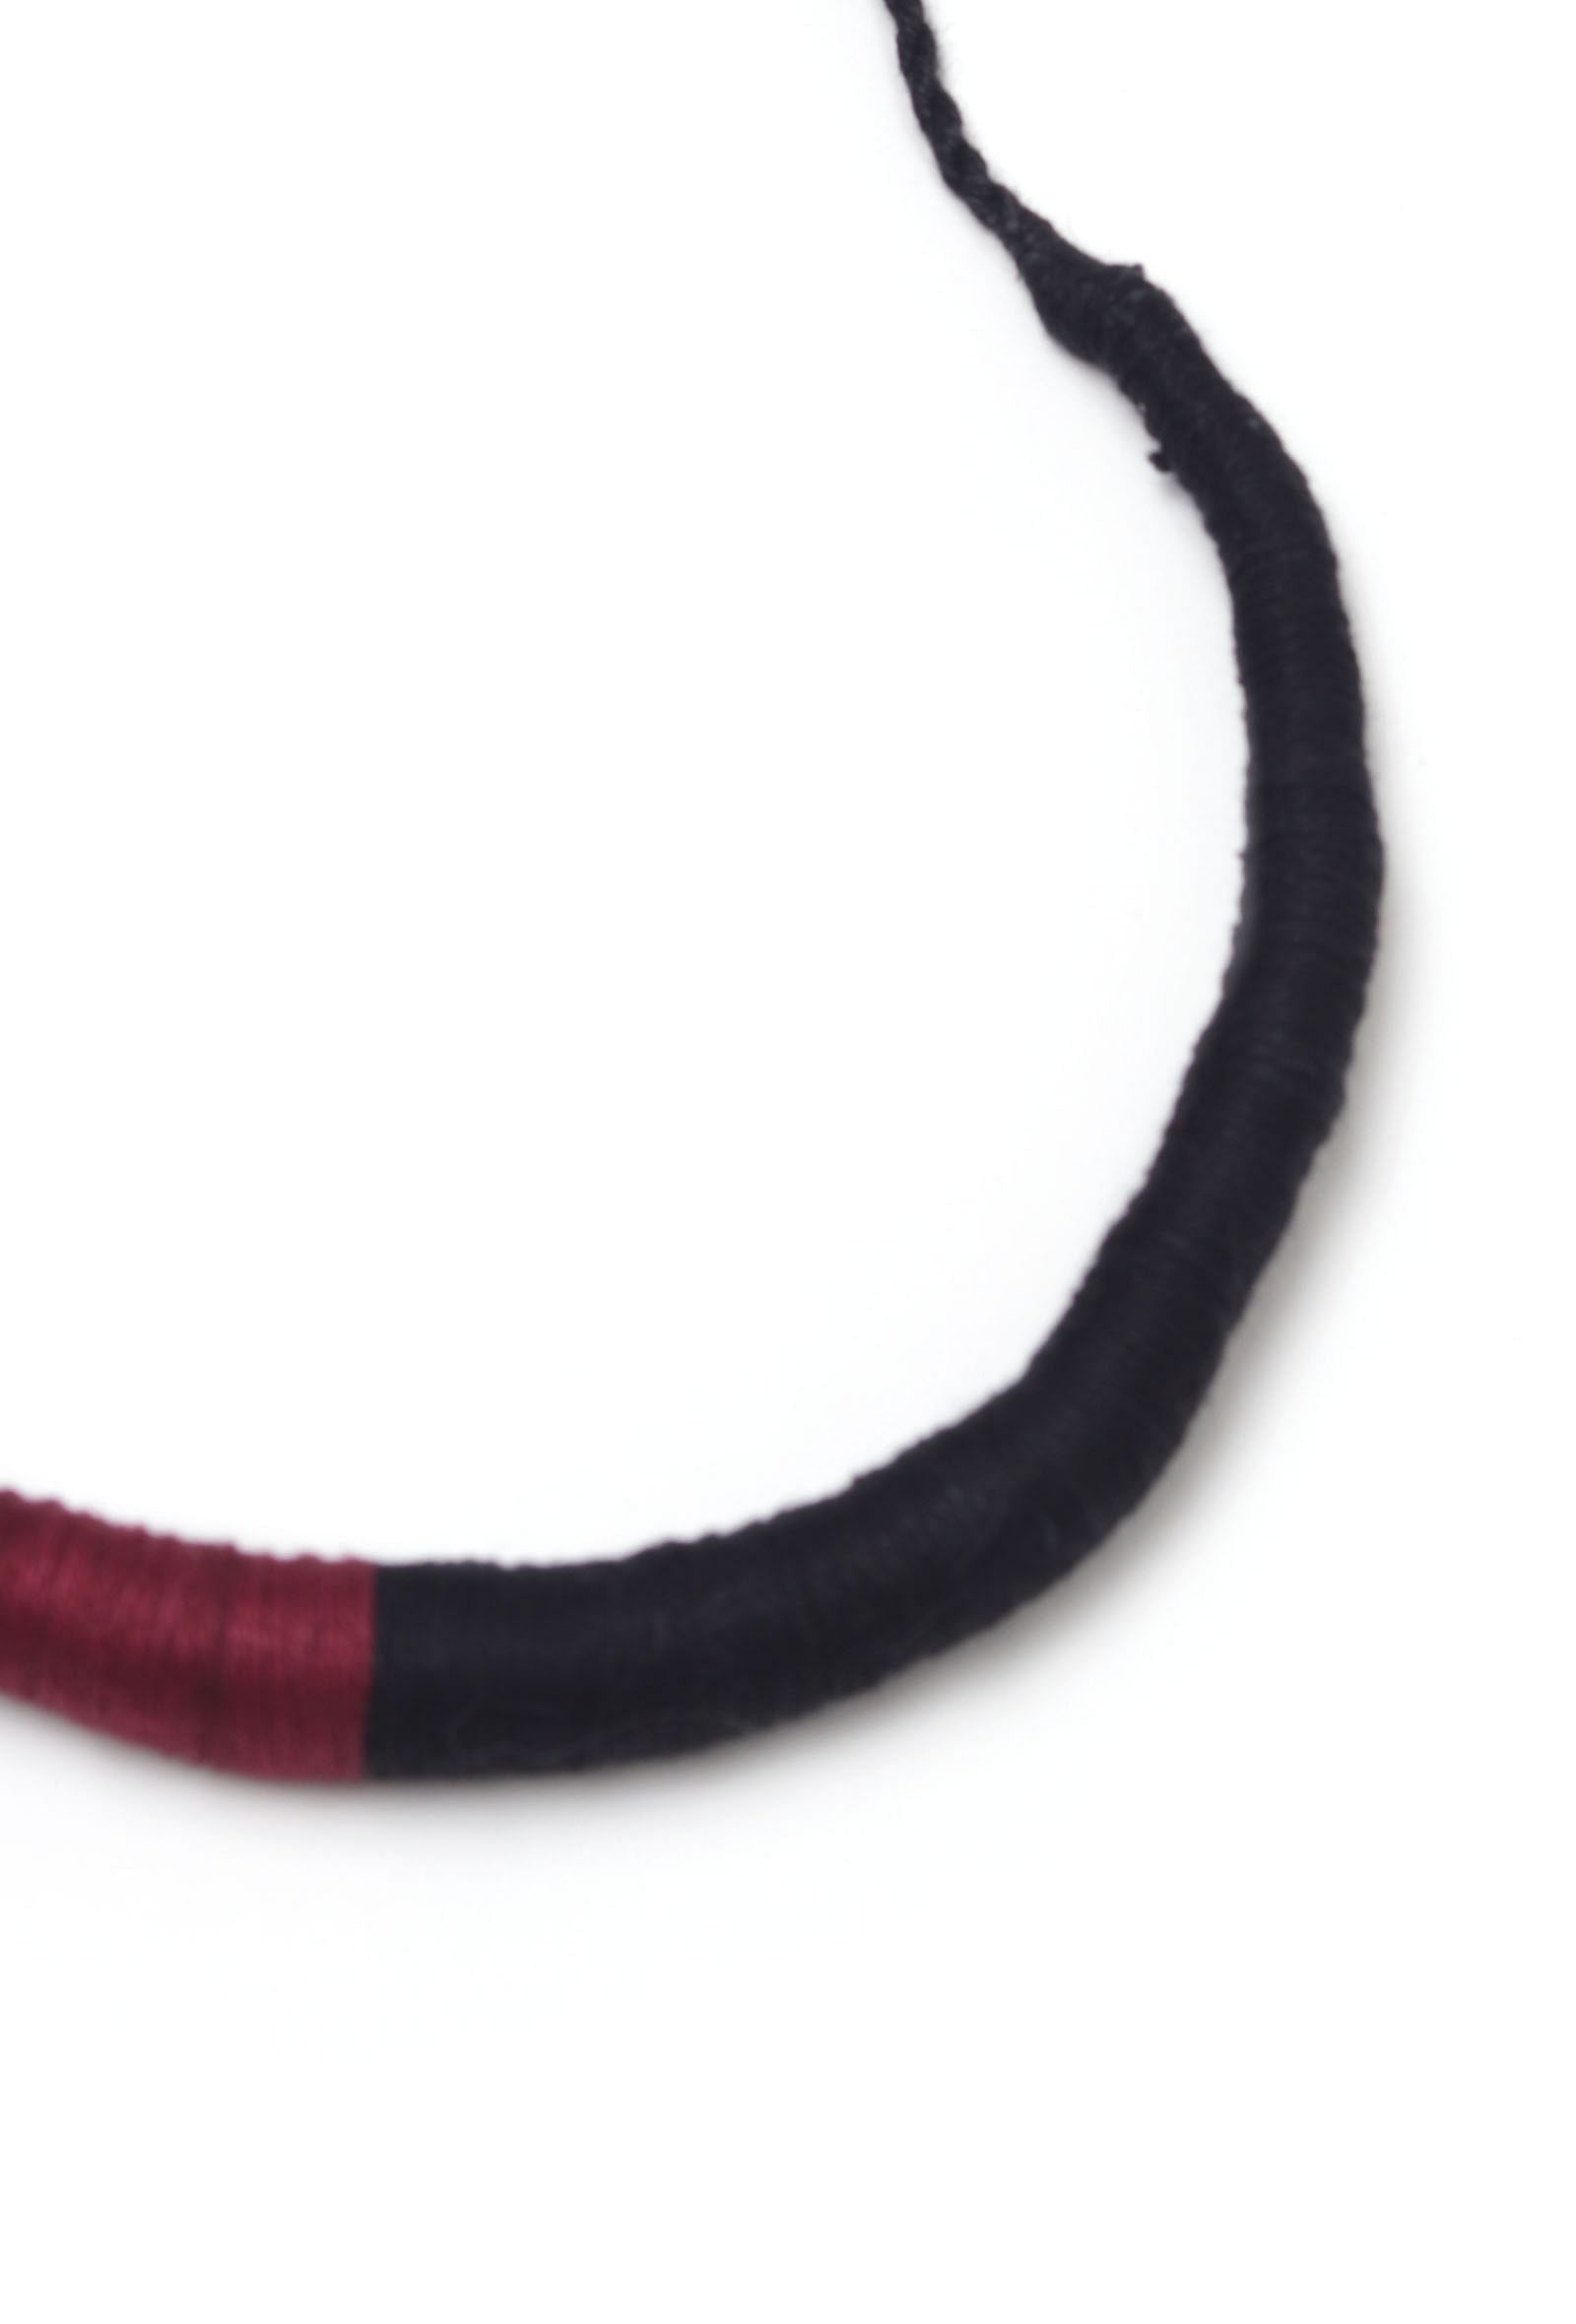 Sana Duo Brown and Black Tribal Thread Necklace